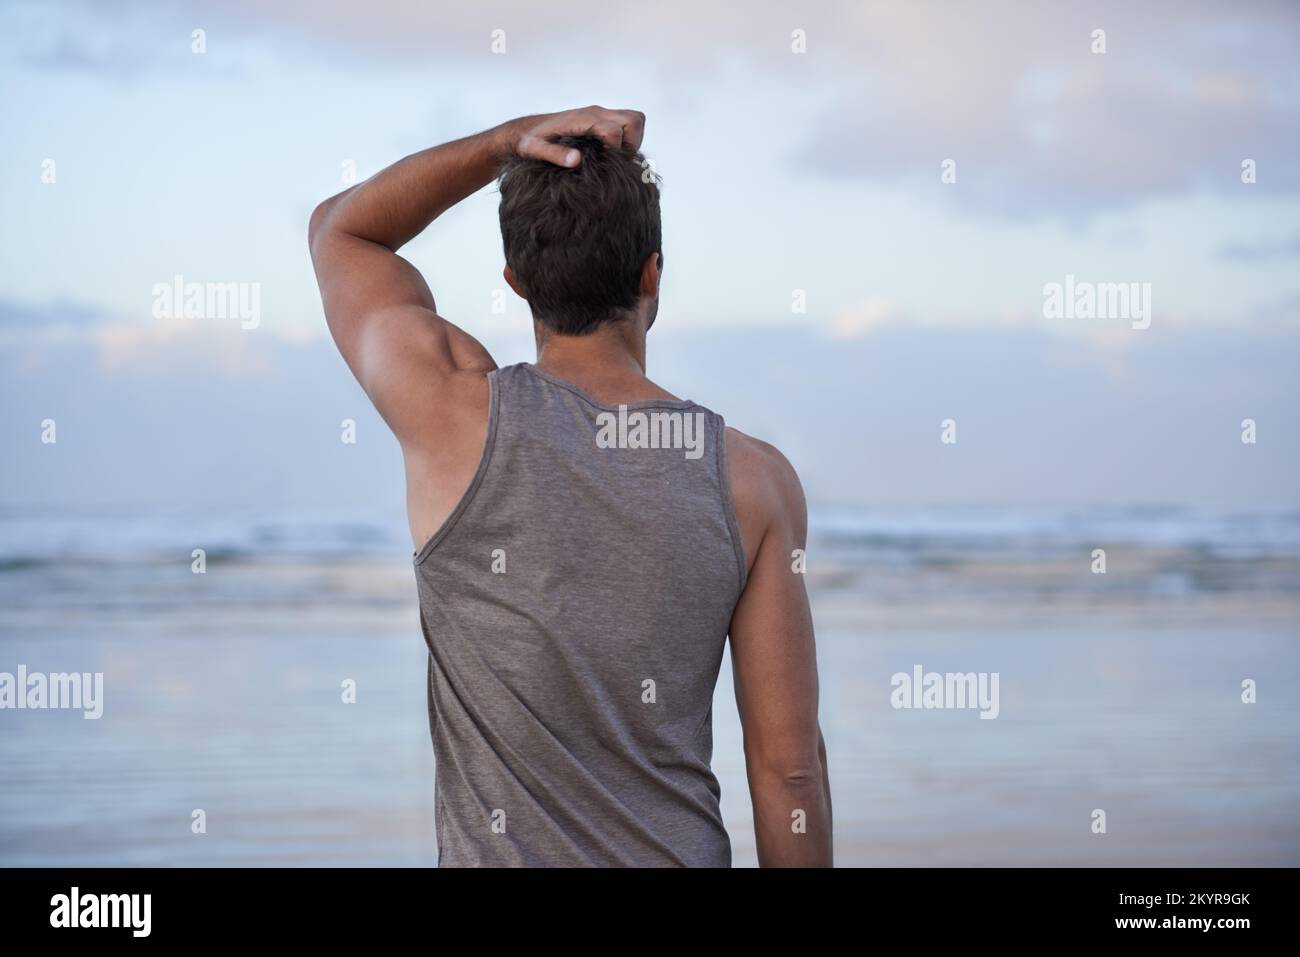 Contemplation on a beautiful morning. Rearview shot of a man with his hand in his hair looking out toward the ocean. Stock Photo